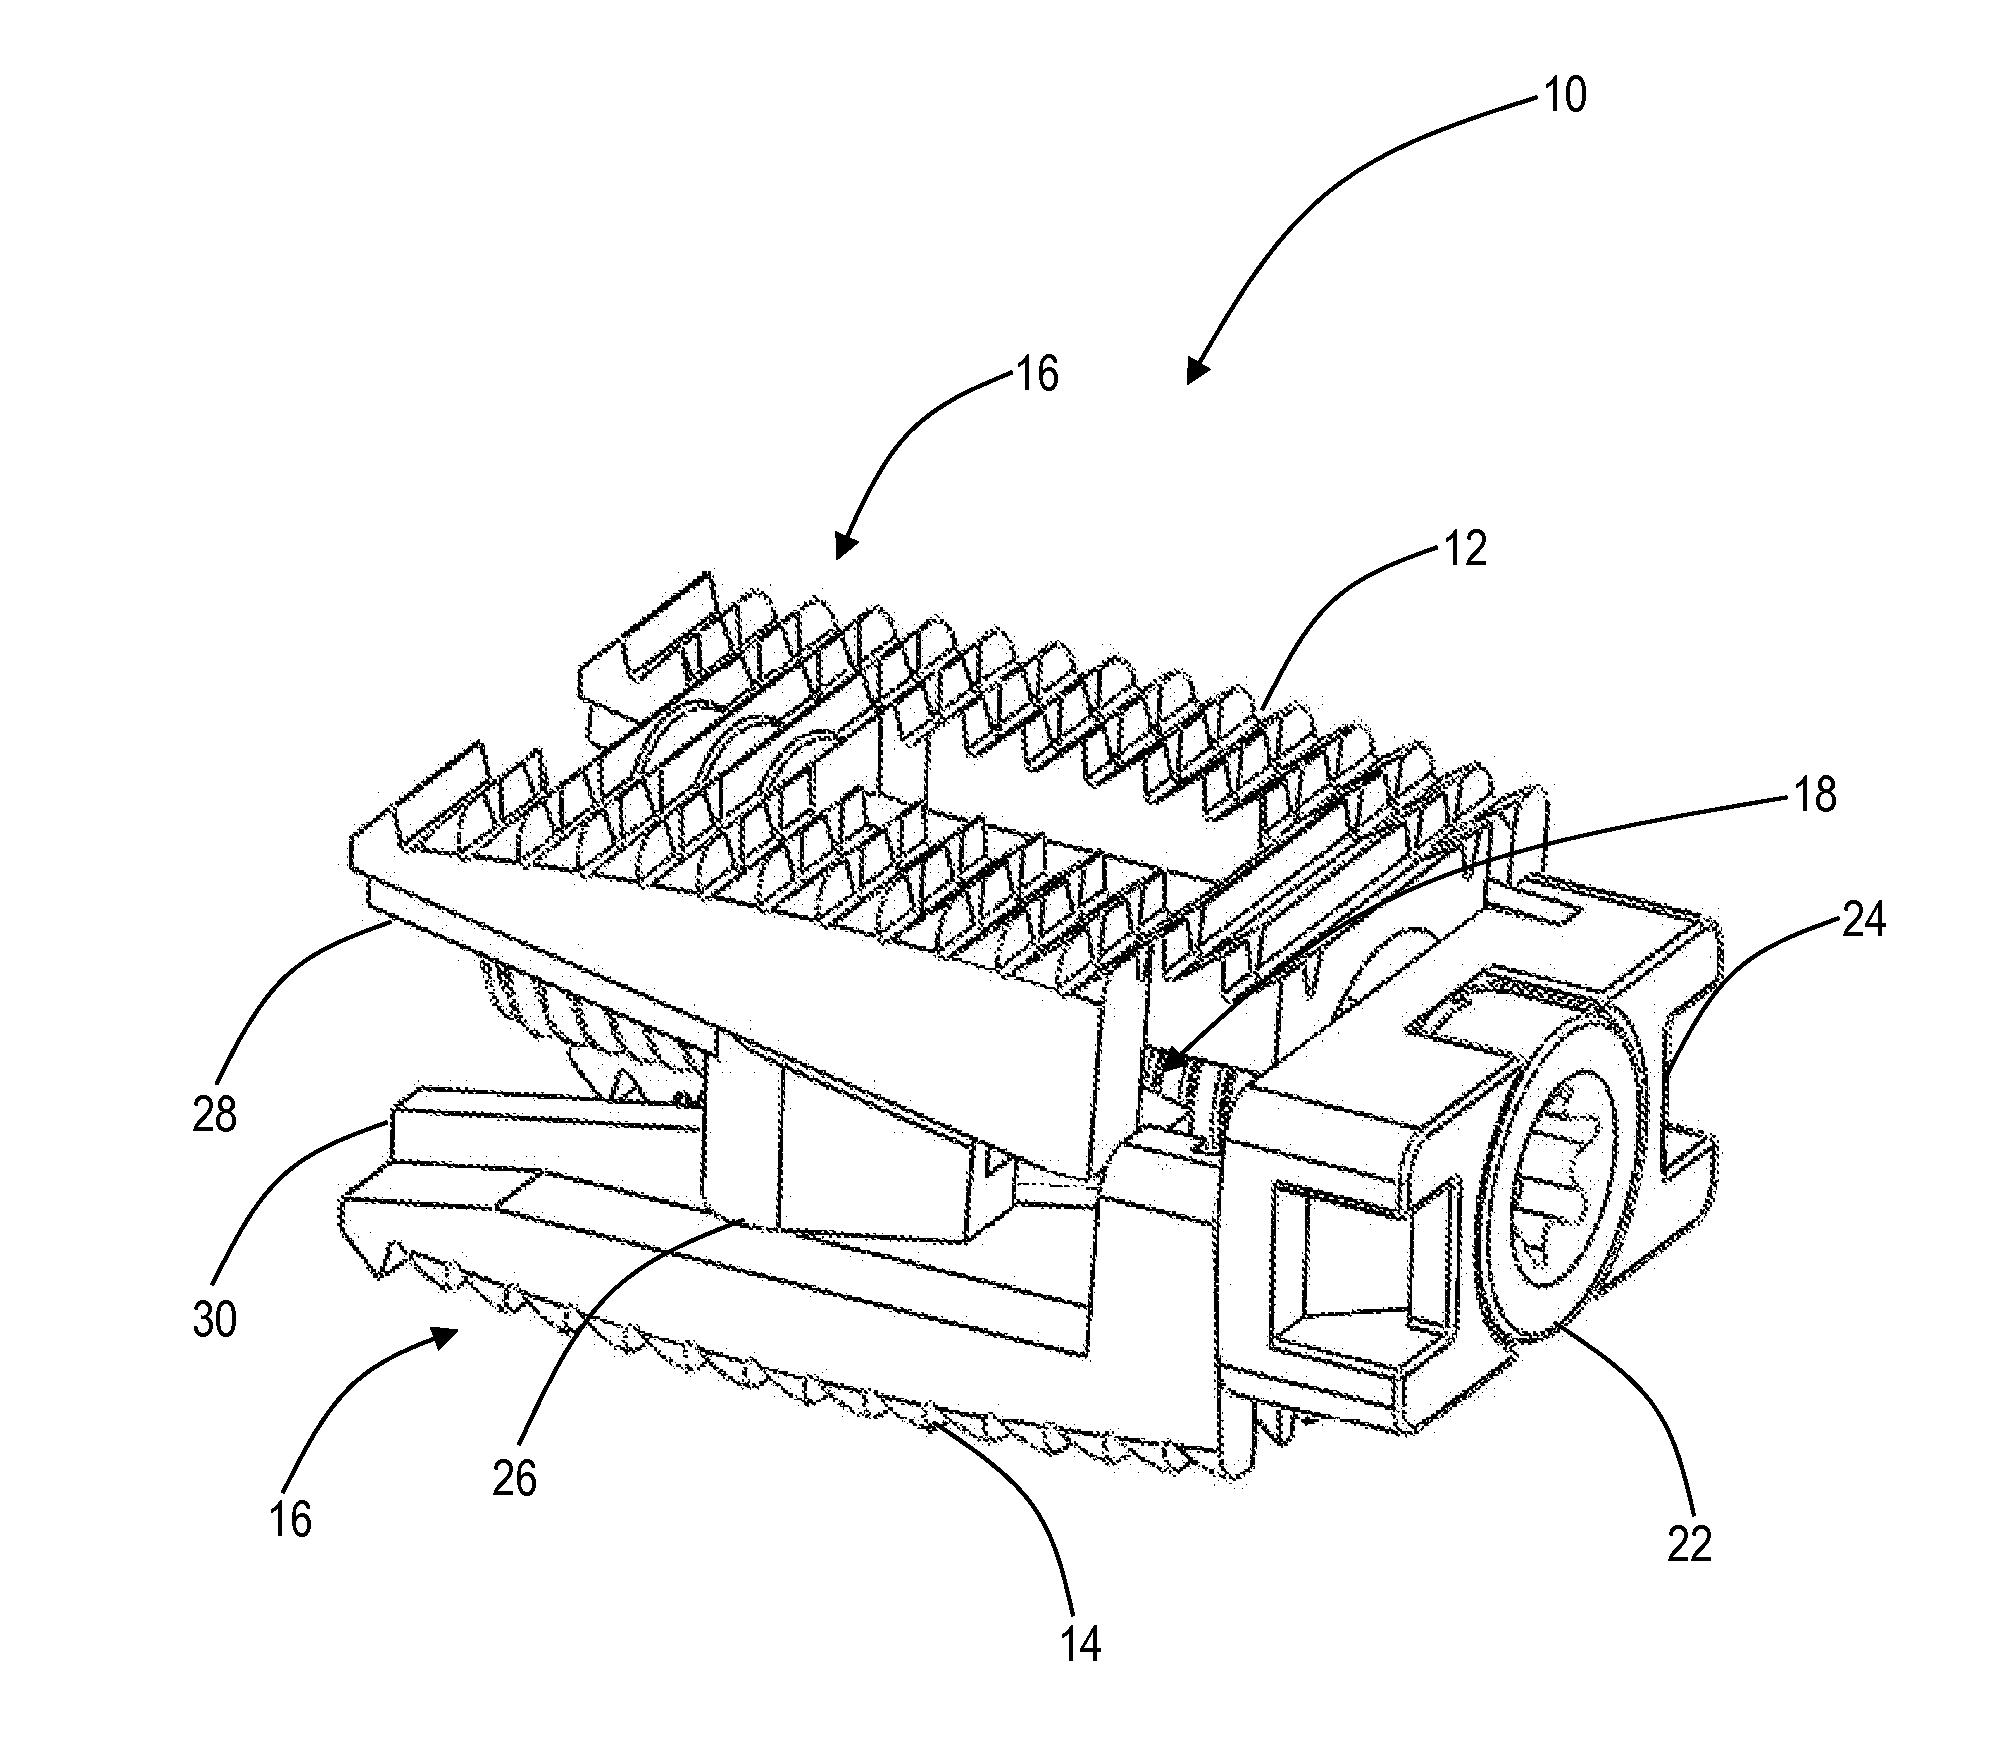 Expandable intervertebral implant and associated surgical method